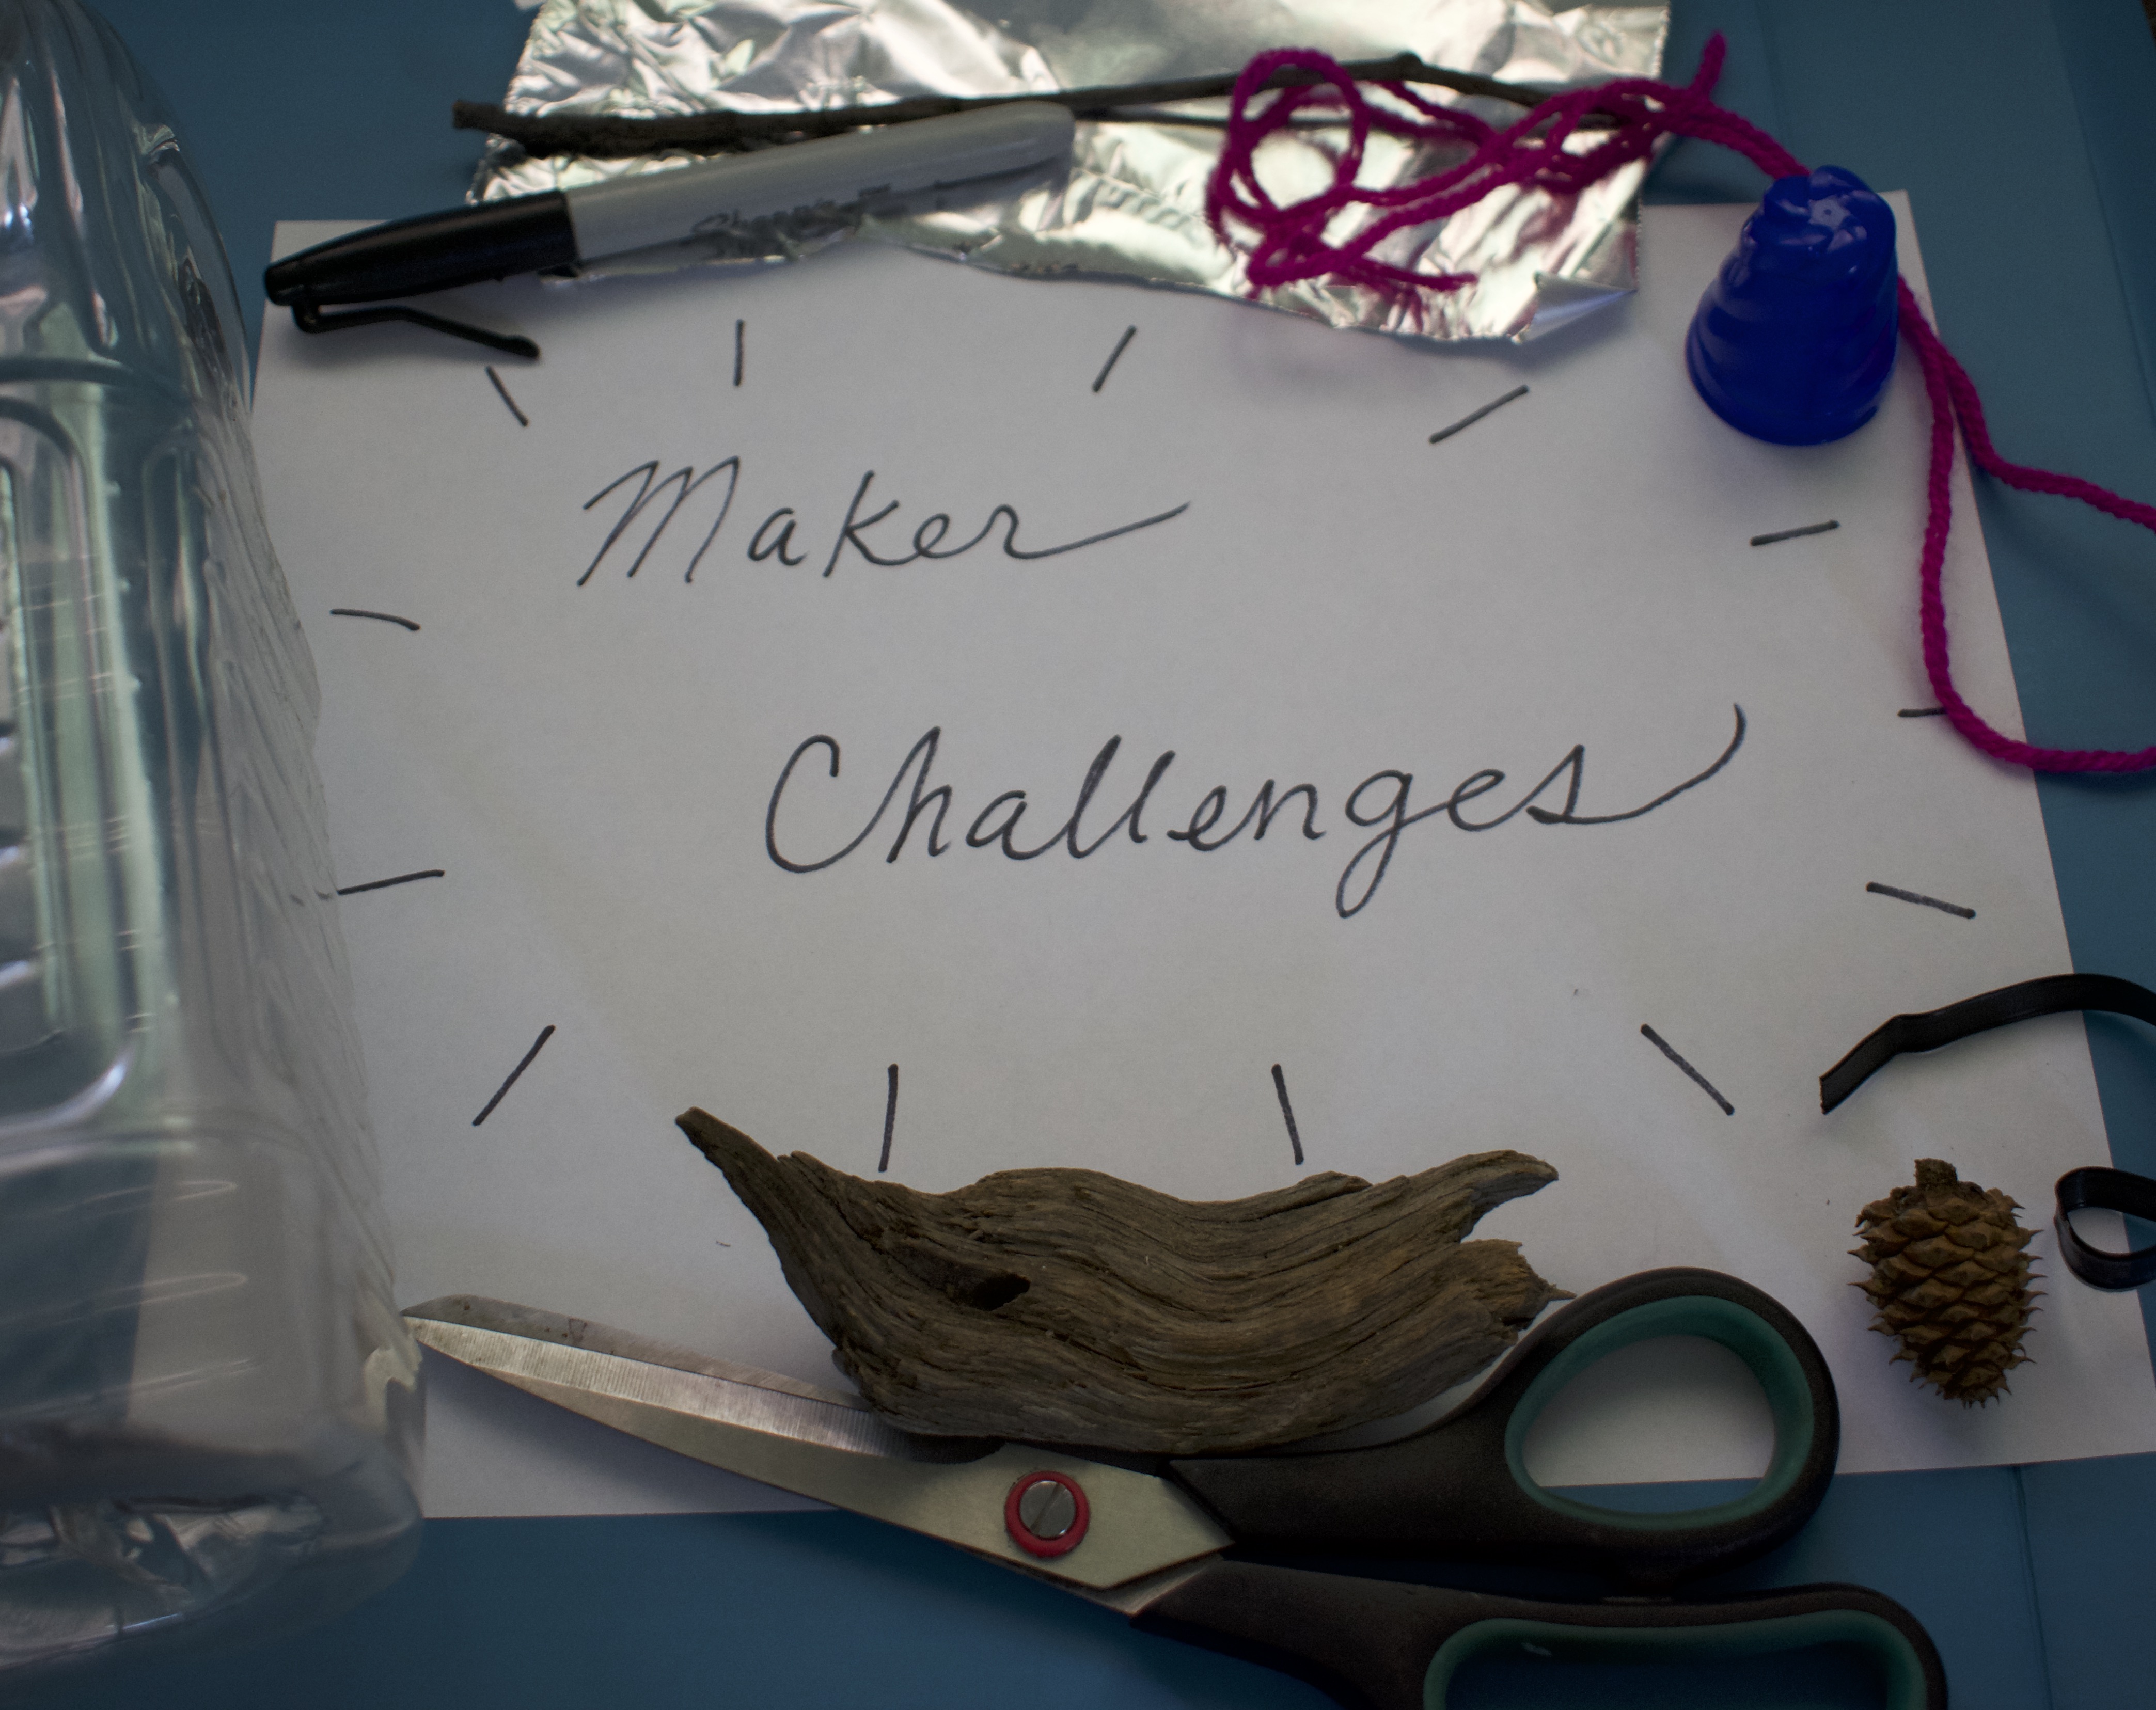 Assorted crafting materials laid out as a frame around piece of paper with the text "Maker Challenges"